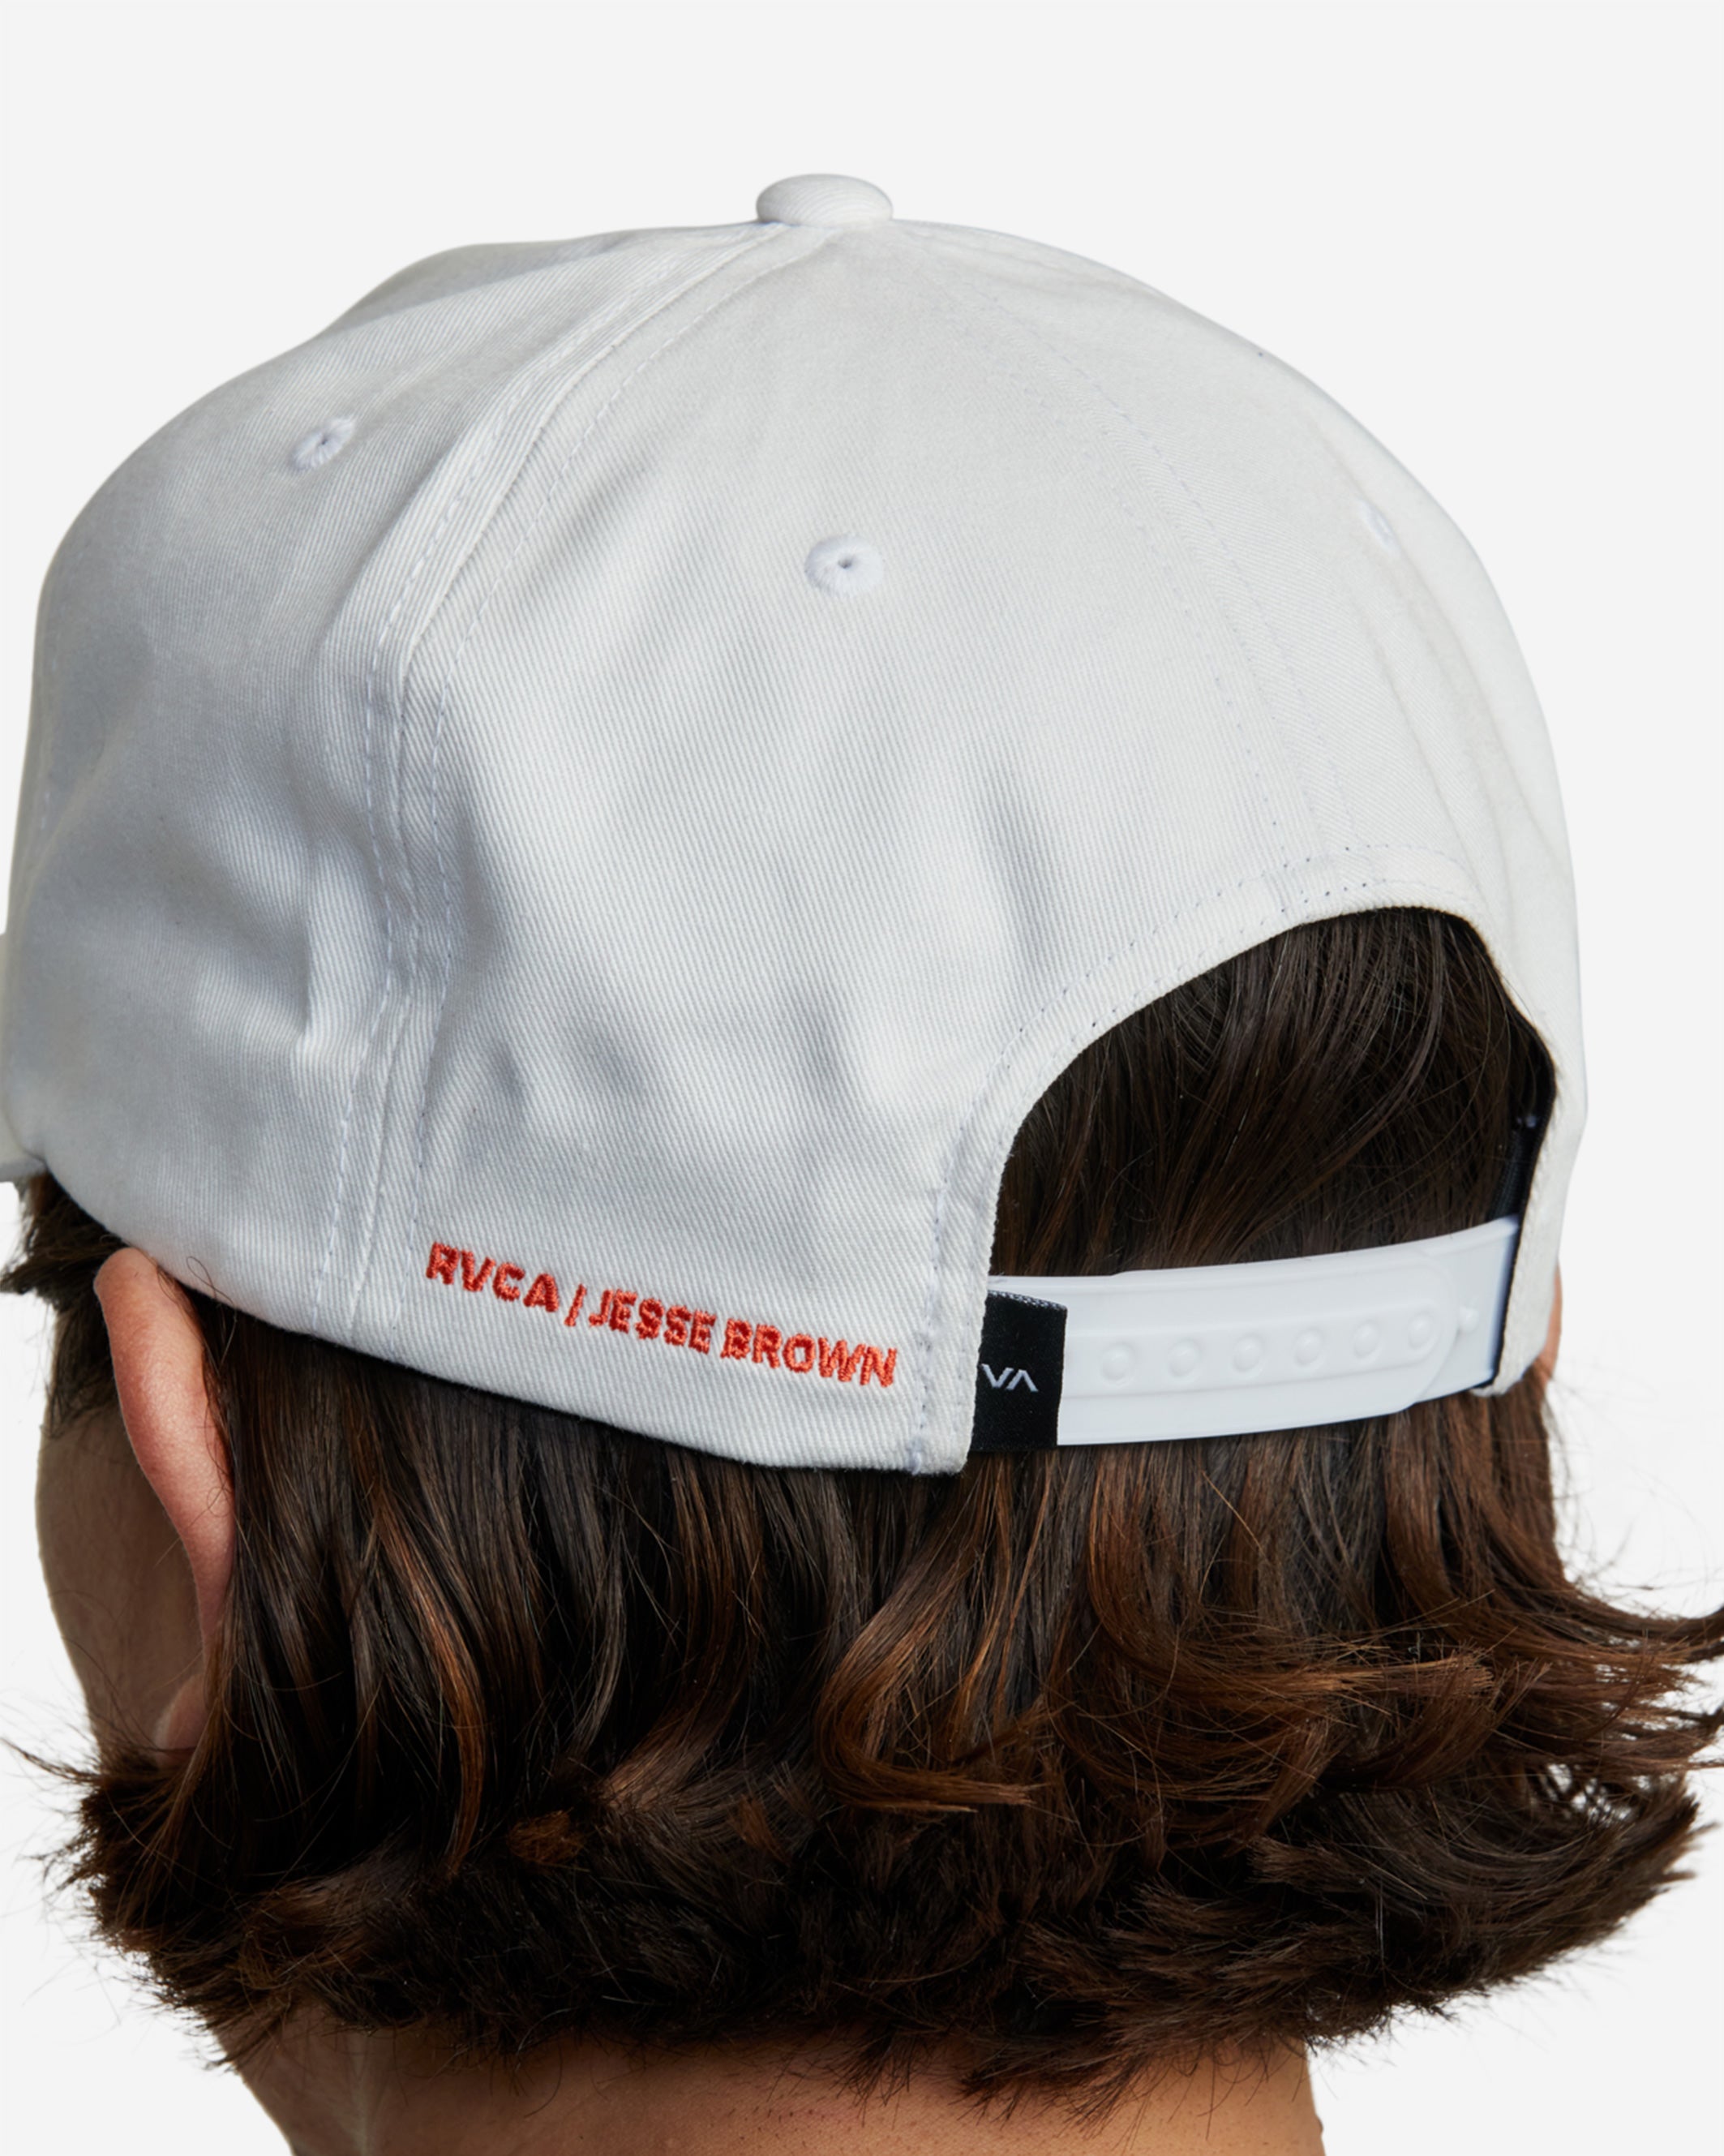 Part of the Jesse Brown collection, this lightly-structured snapback hat features an ANP art patch at the front and an adjustable closure at the back.